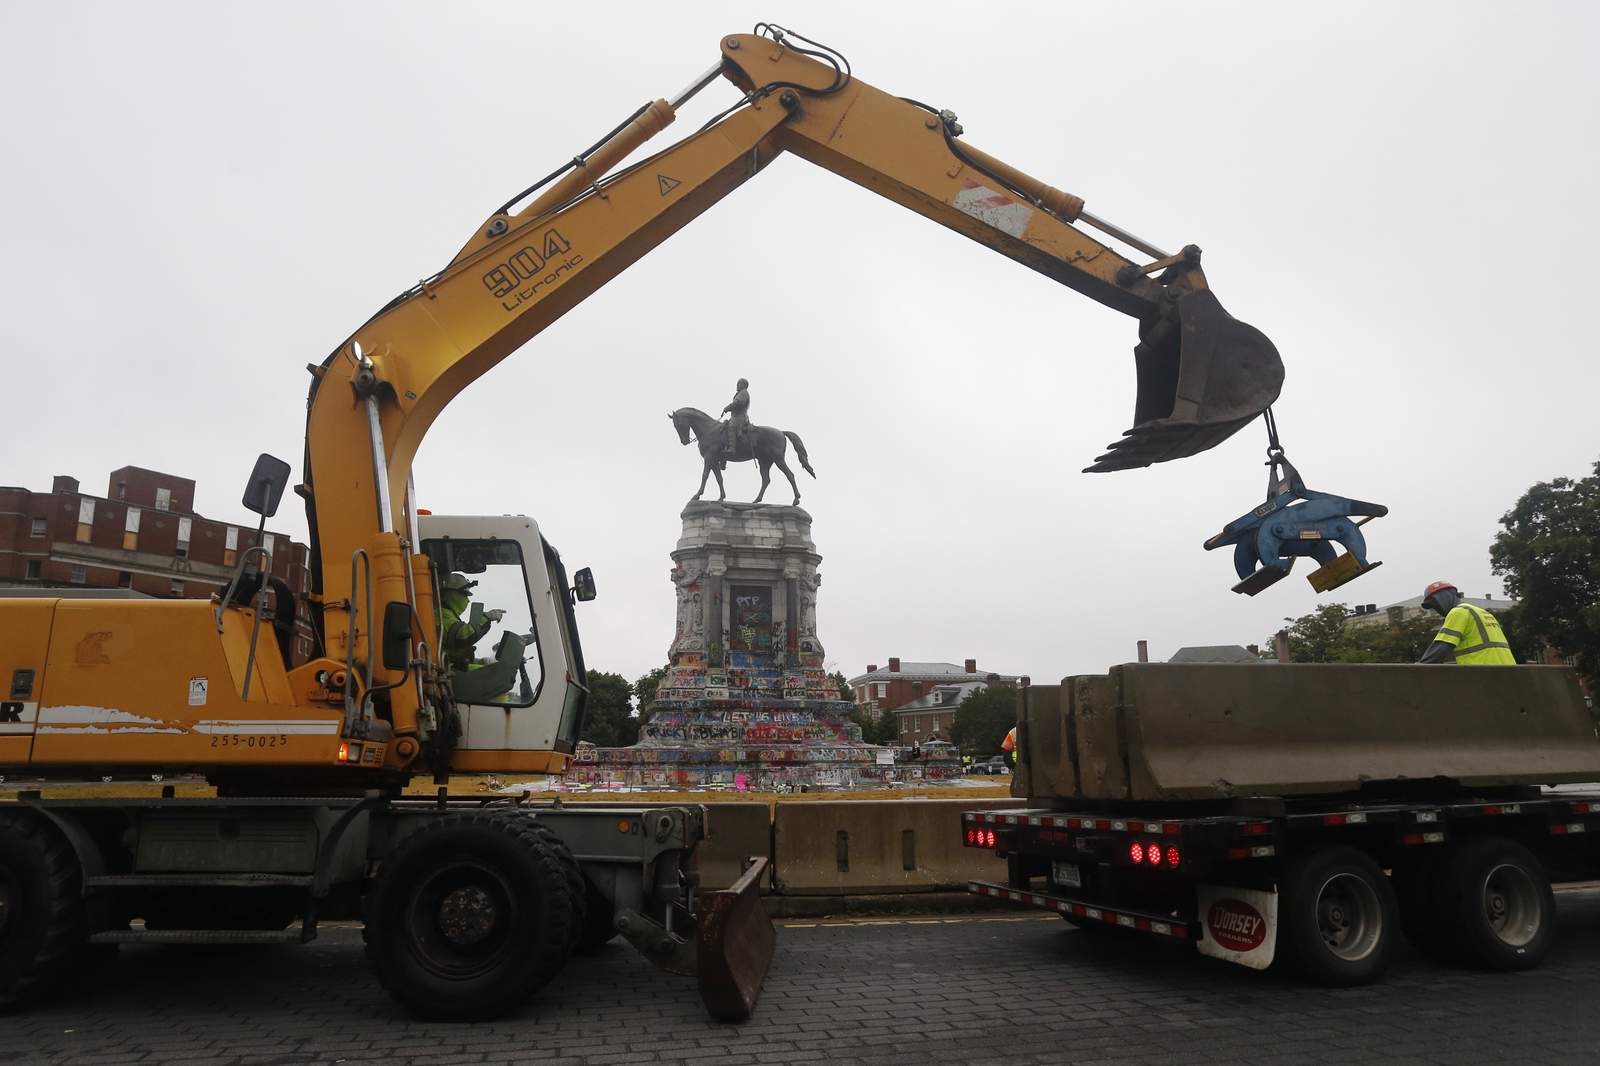 Injunction extended against removing Lee statue in Virginia